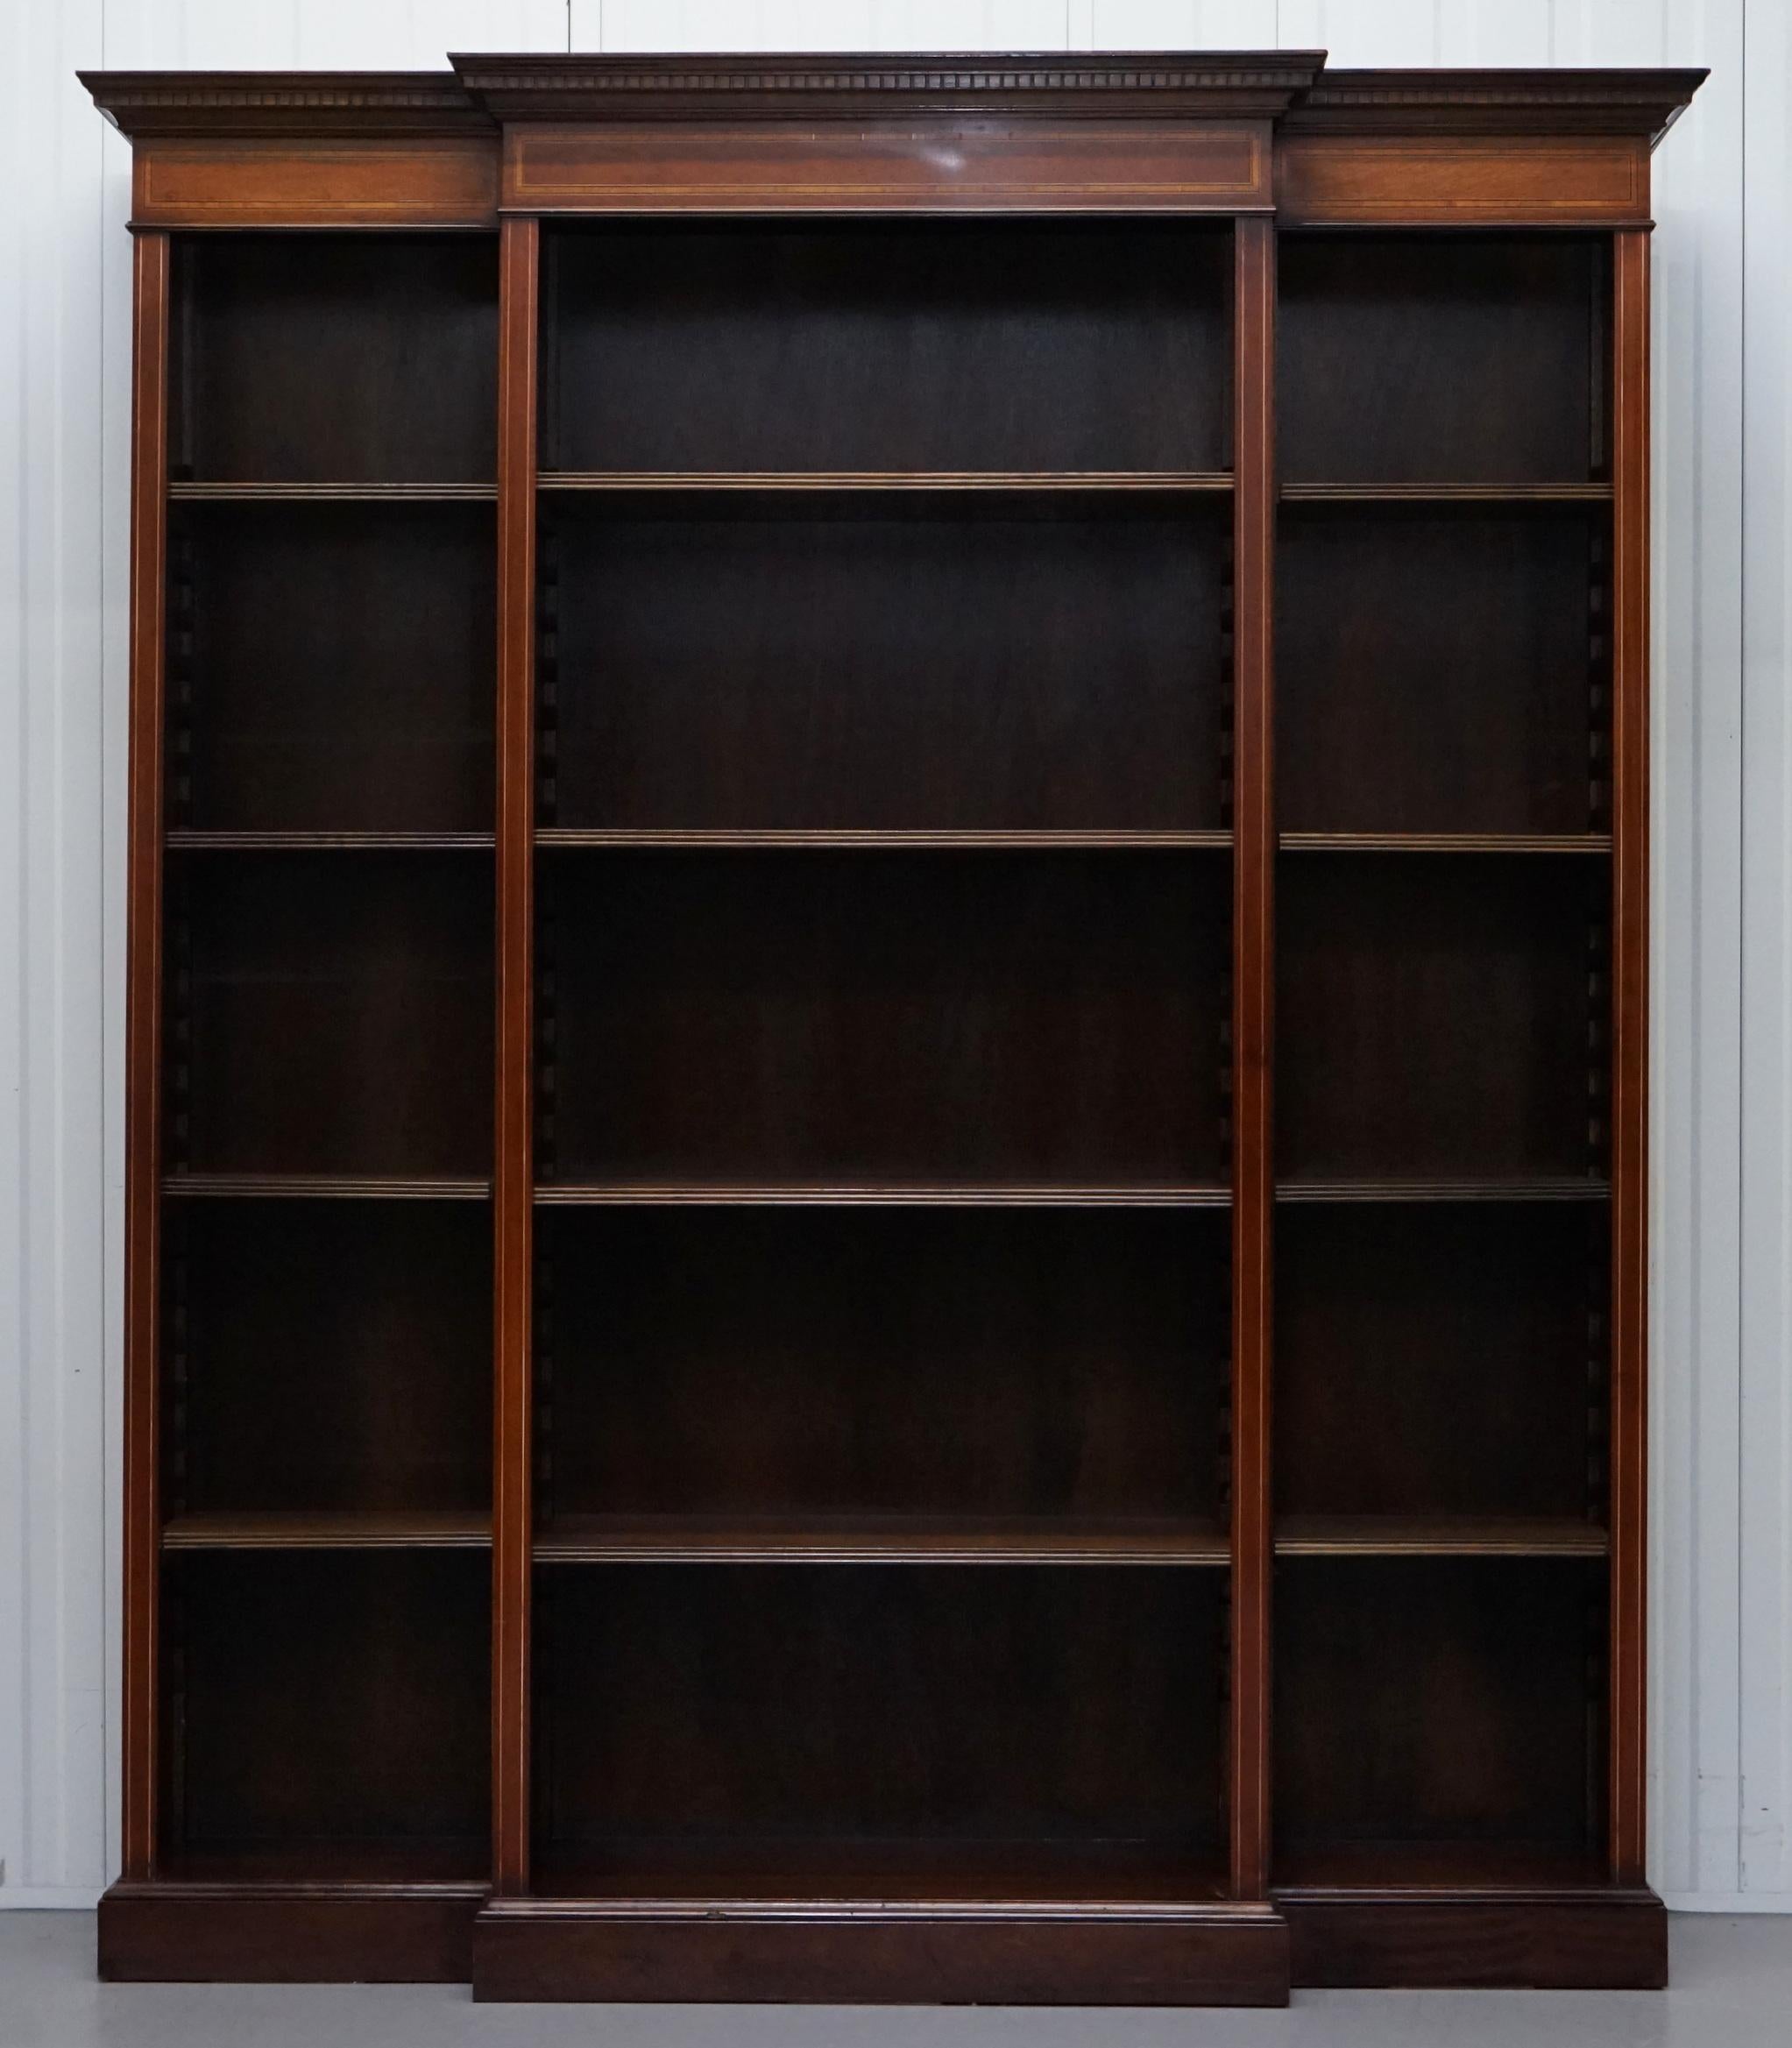 We are delighted to offer for sale this lovely vintage mahogany library breakfront bookcase

A good looking and functional piece, all the shelves are removable and height adjustable

We have deep cleaned hand condition waxed and hand polished it